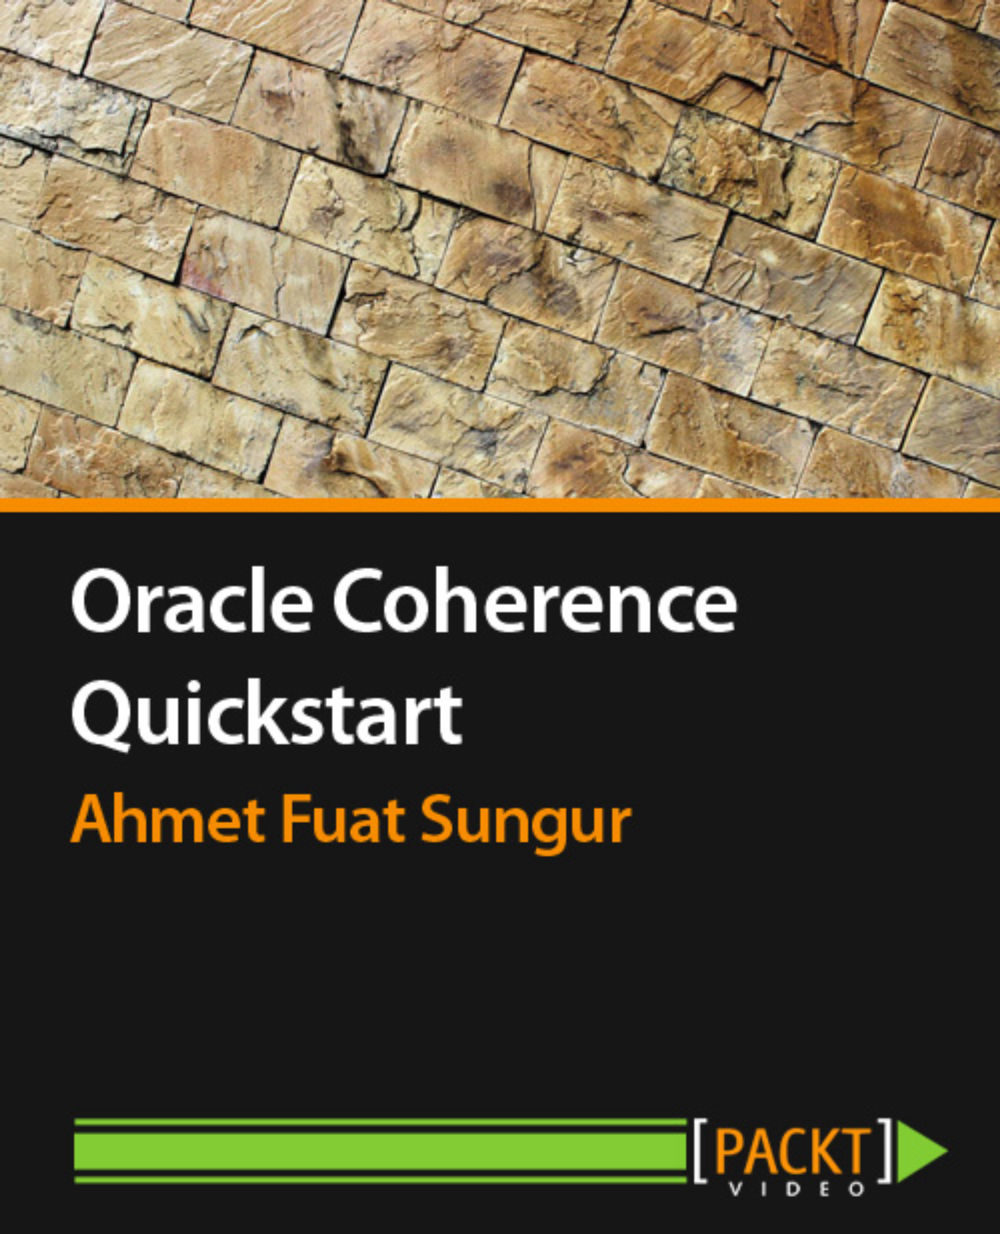 Oracle Coherence Quickstart